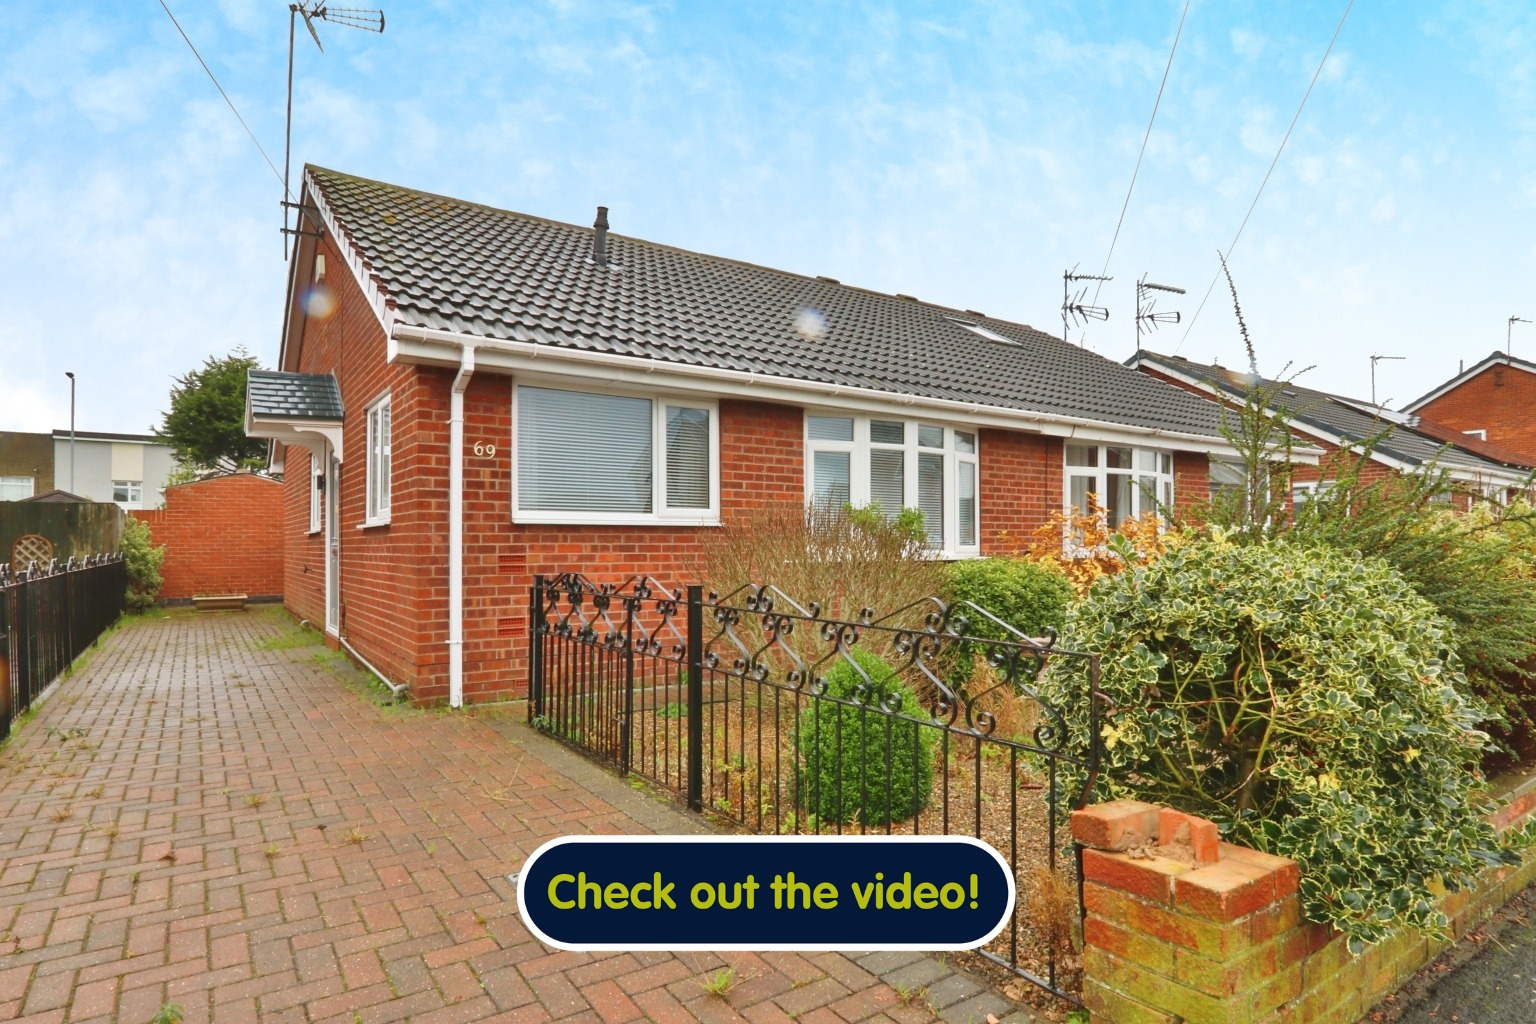 2 bed bungalow for sale in Weardale, Hull - Property Image 1